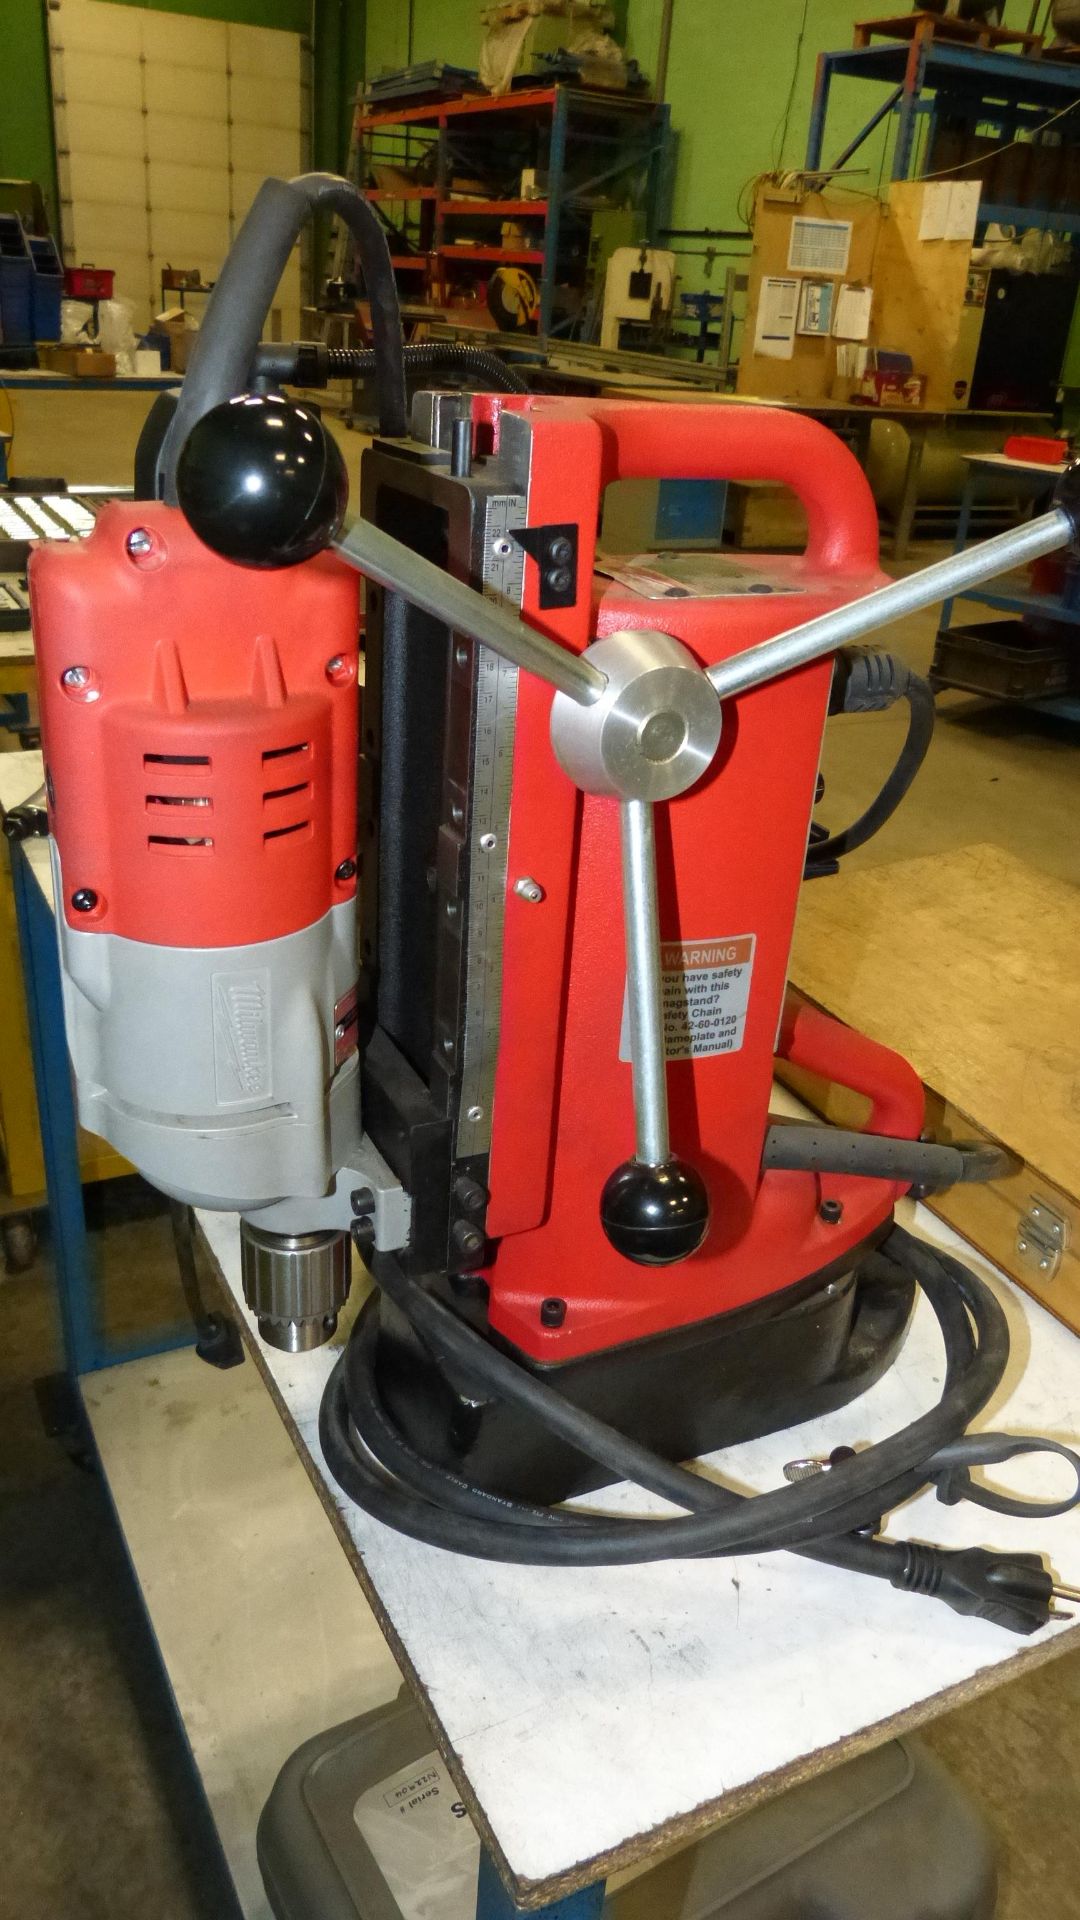 MILWAUKEE ELECTRONIC MAGNETIC DRILL PRESS